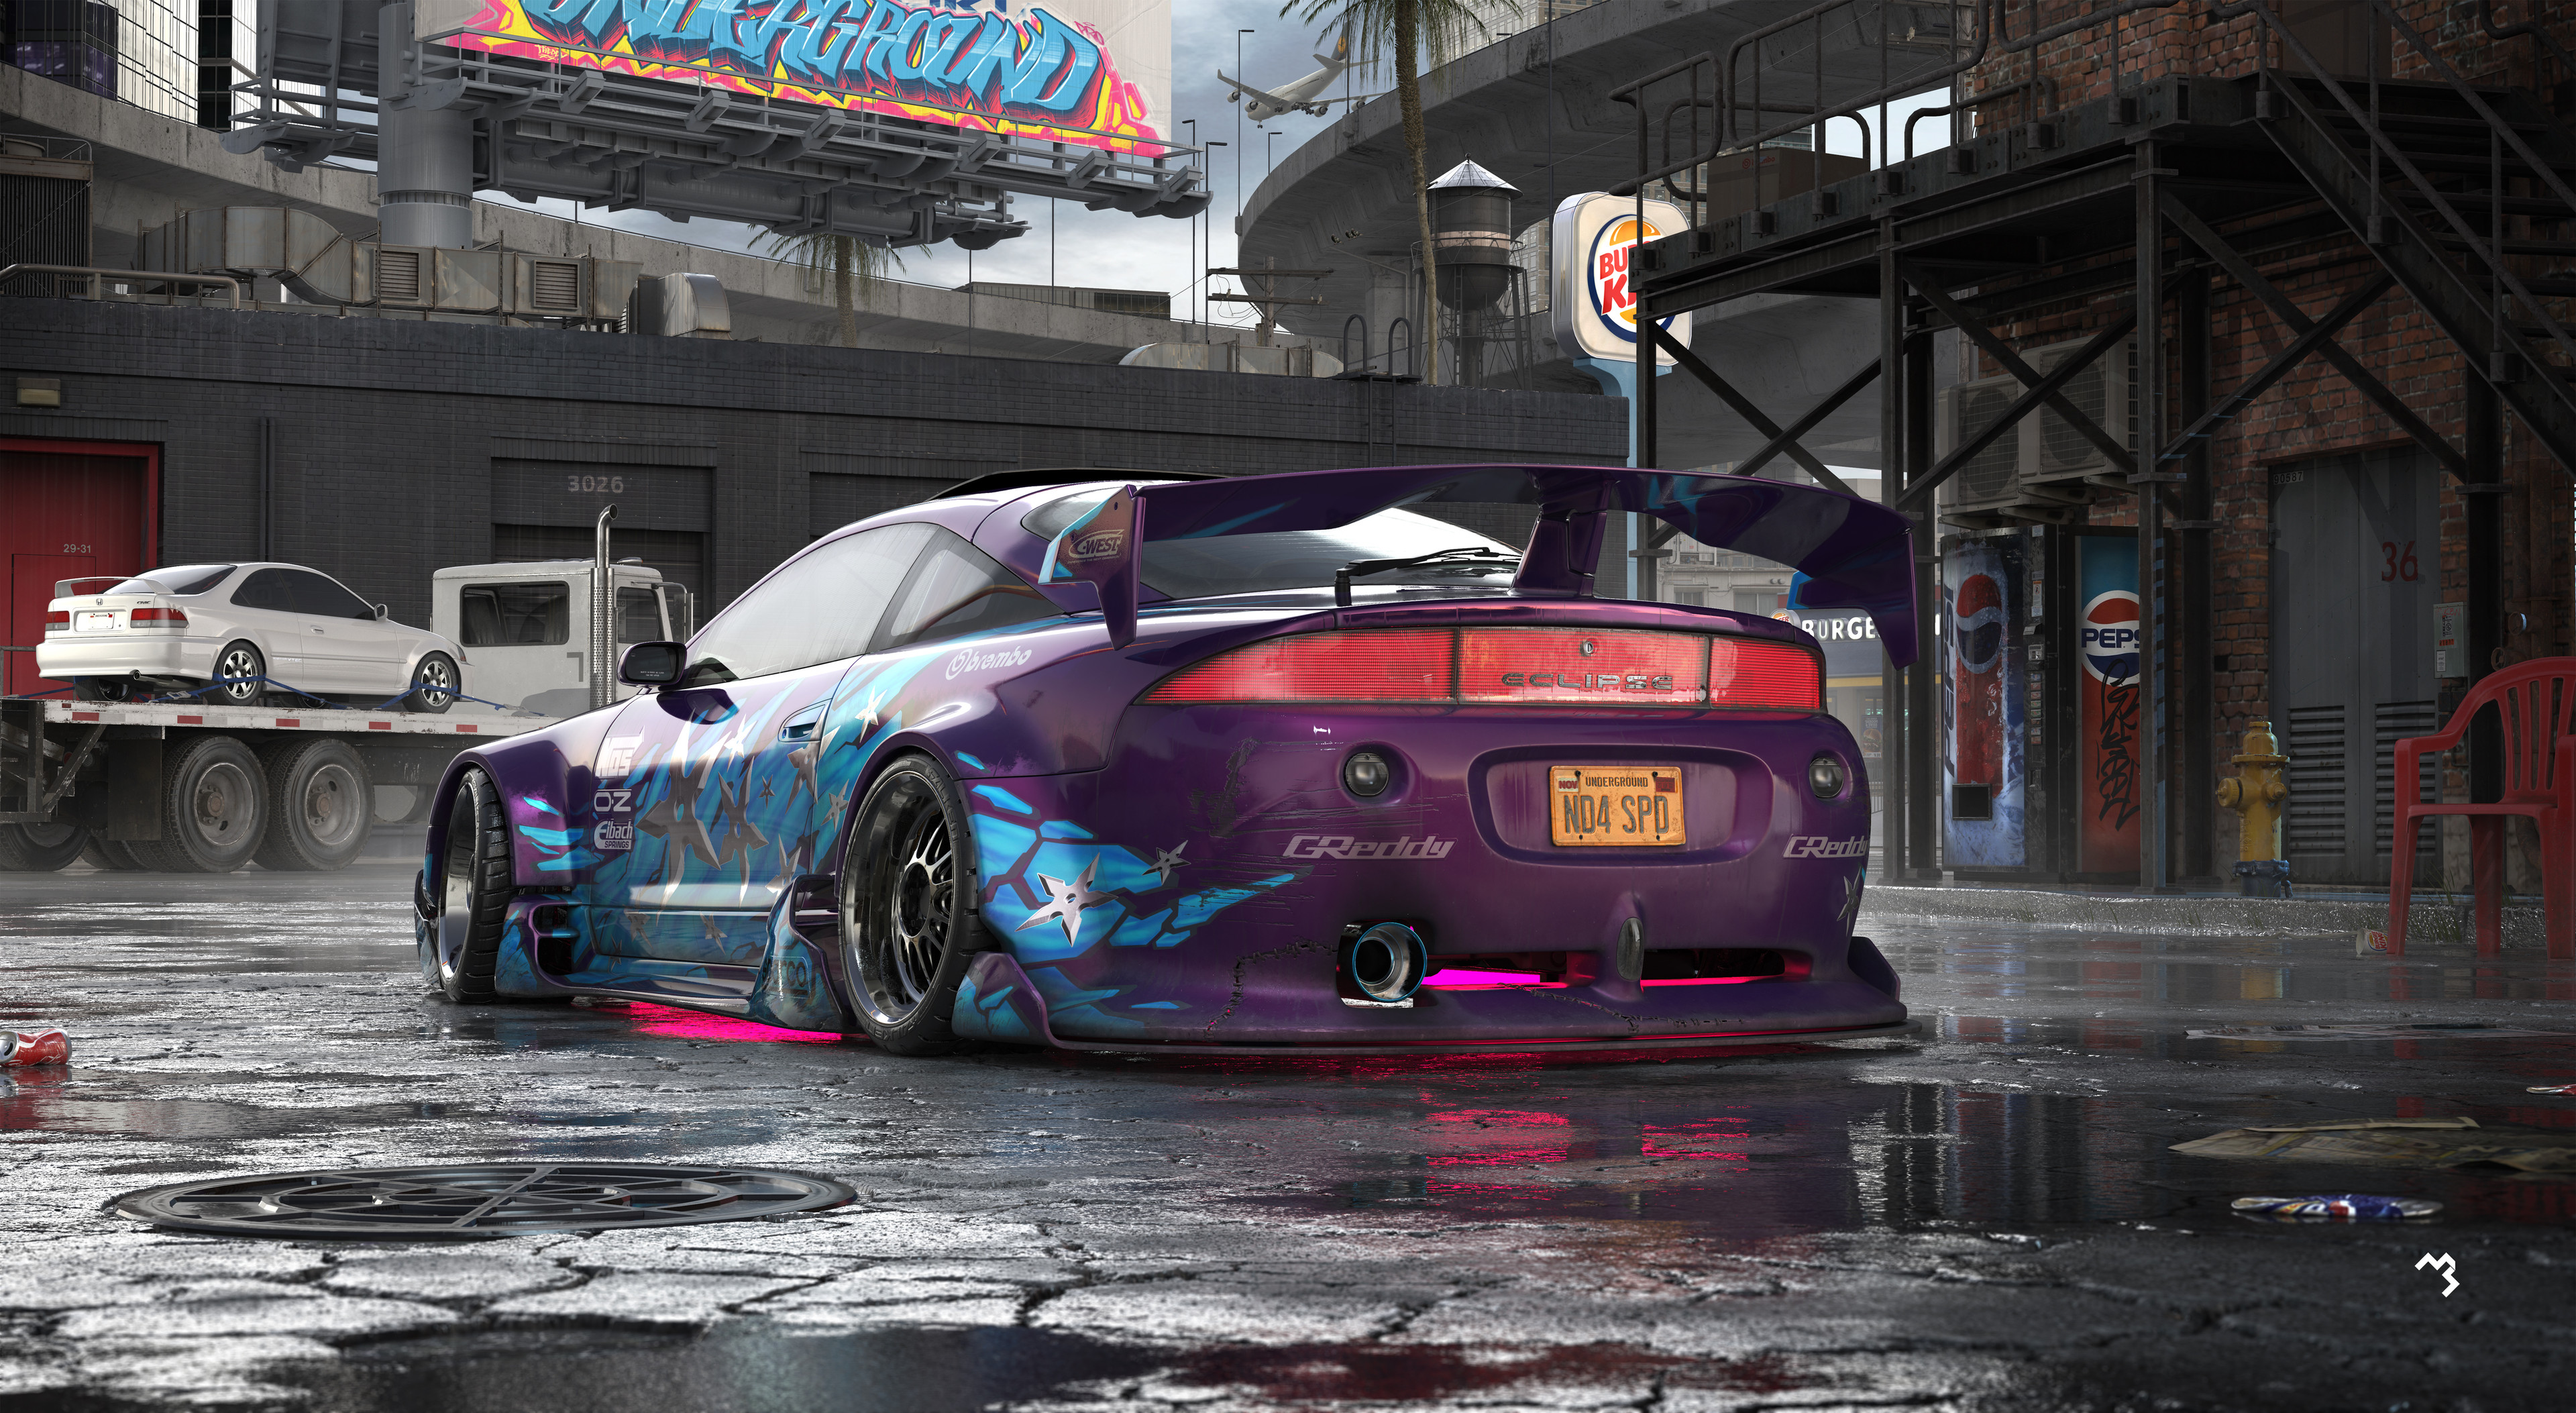 General 3840x2106 Mikhail Solovarov CGI digital art artwork vehicle car street Mitsubishi Eclipse GS-T tuning Mitsubishi Honda Civic concept art 4K bodykit Need for Speed Need for Speed: Underground rear view licence plates reflection Japanese cars